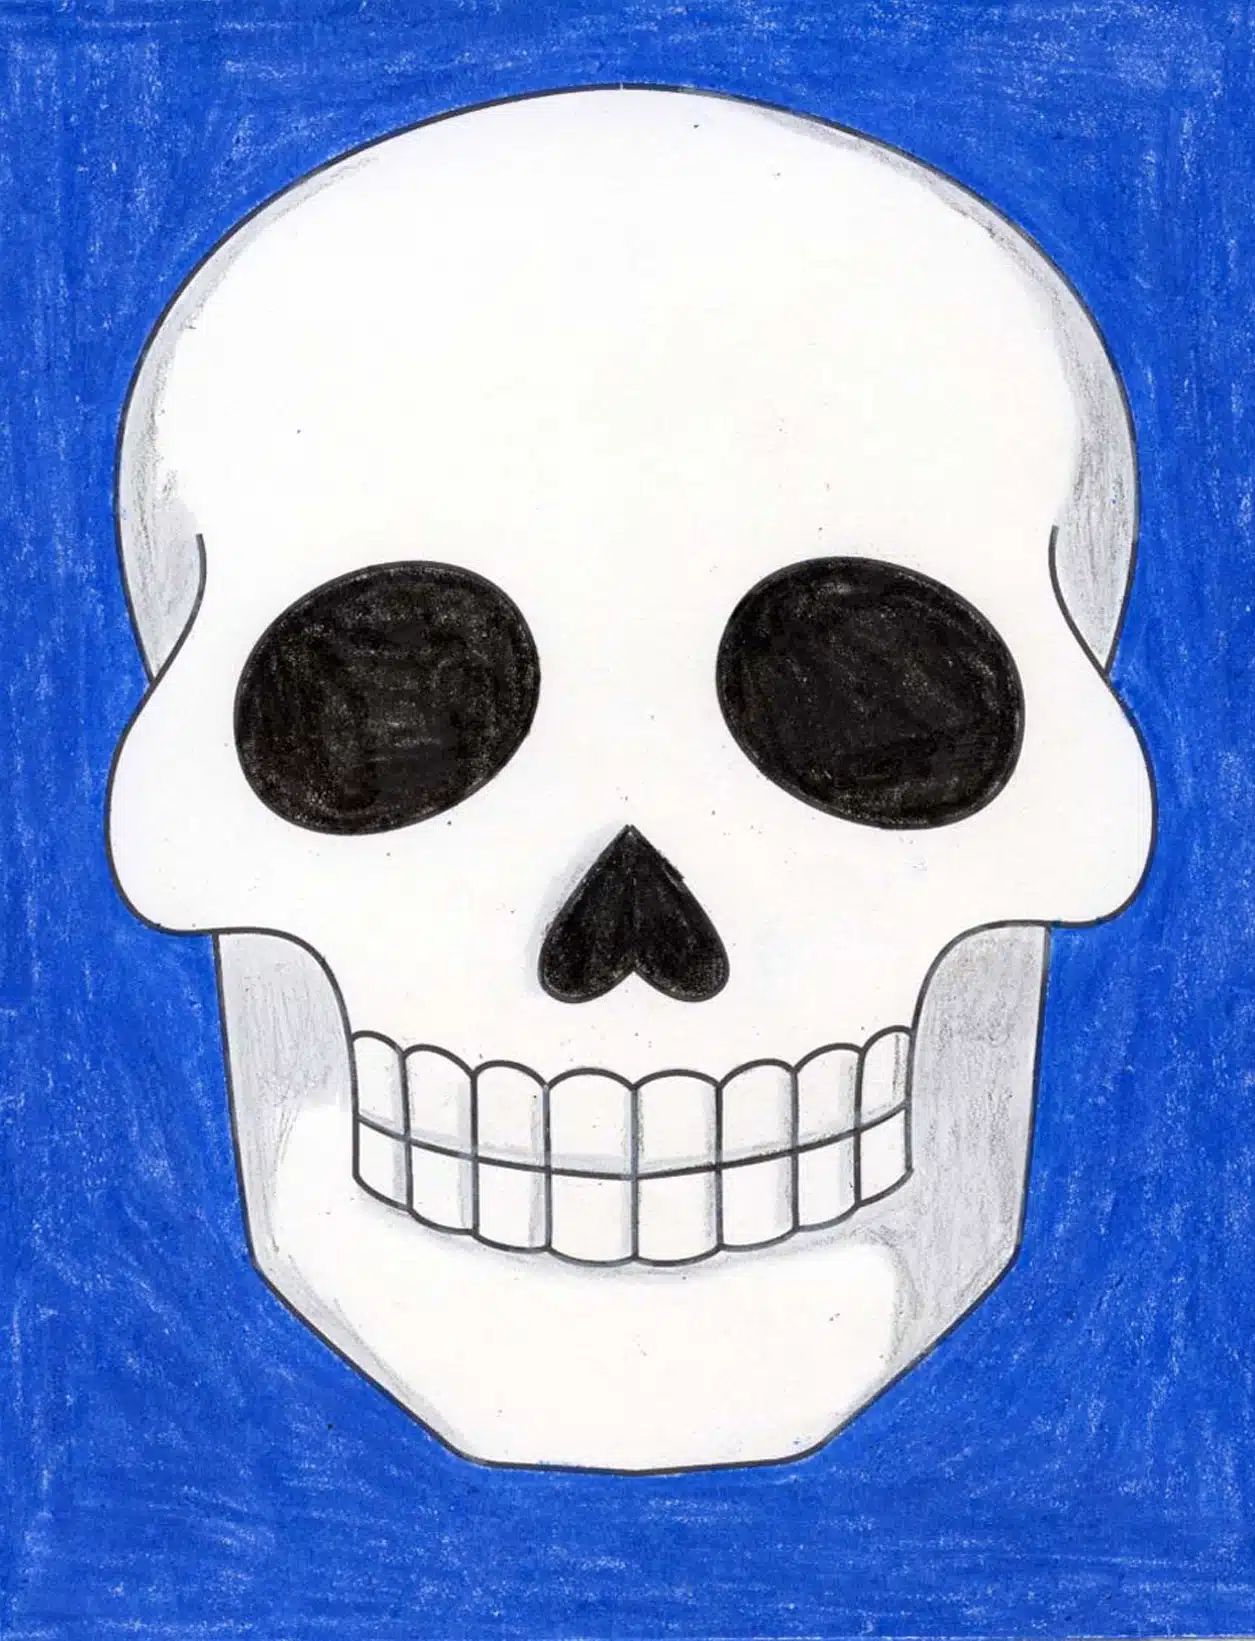 How to Draw a Skull (Side View) for Halloween Step-by-Step Pictures